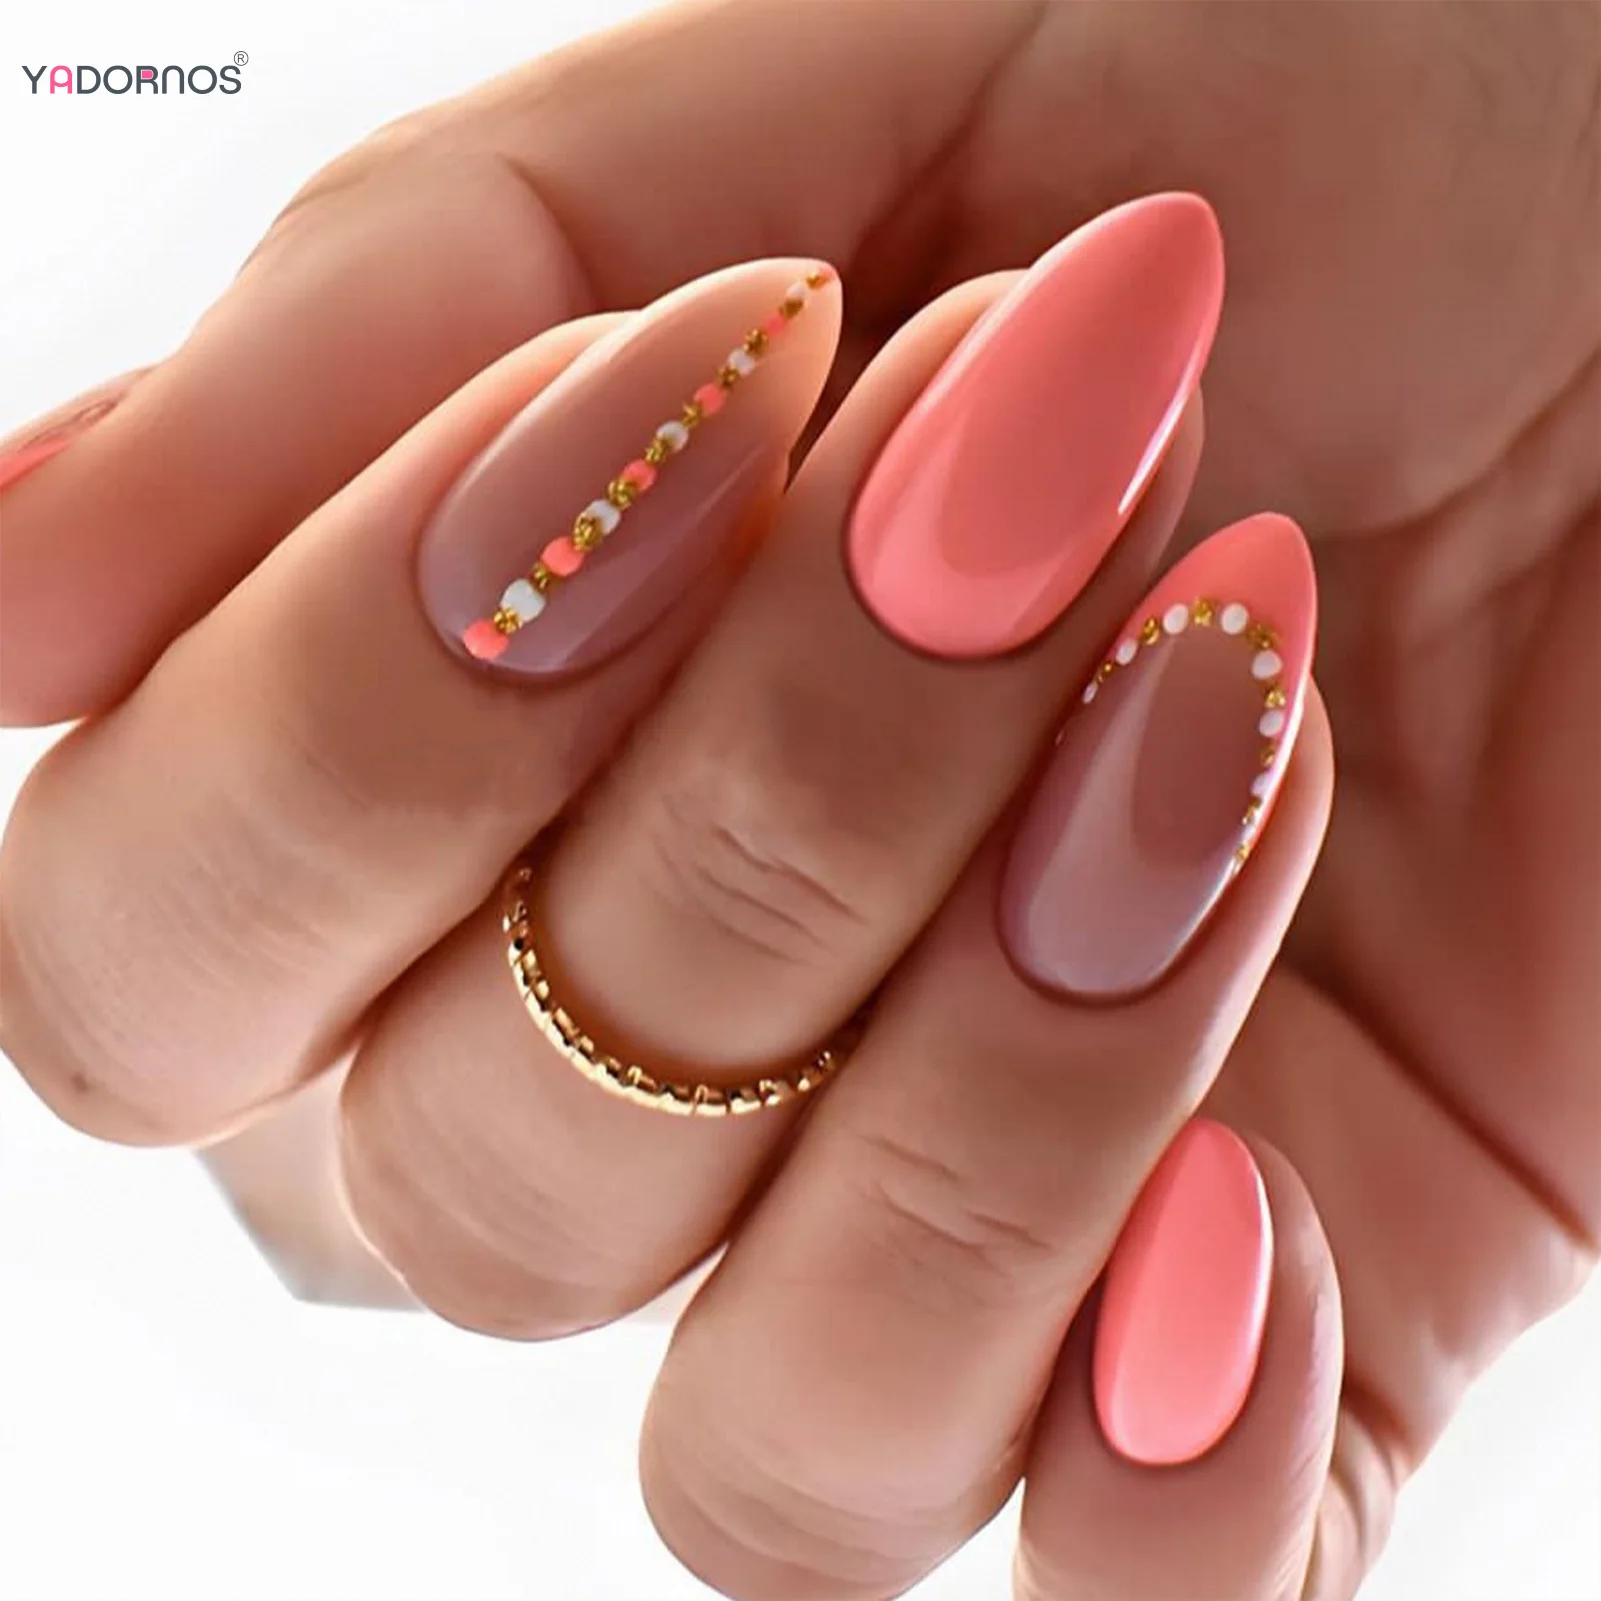 

24Pcs Pink Almond Fake Nails with Designs Nude Color False Nails Full Cover Acrylic Press on Nails for Women Girls DIY Manicure